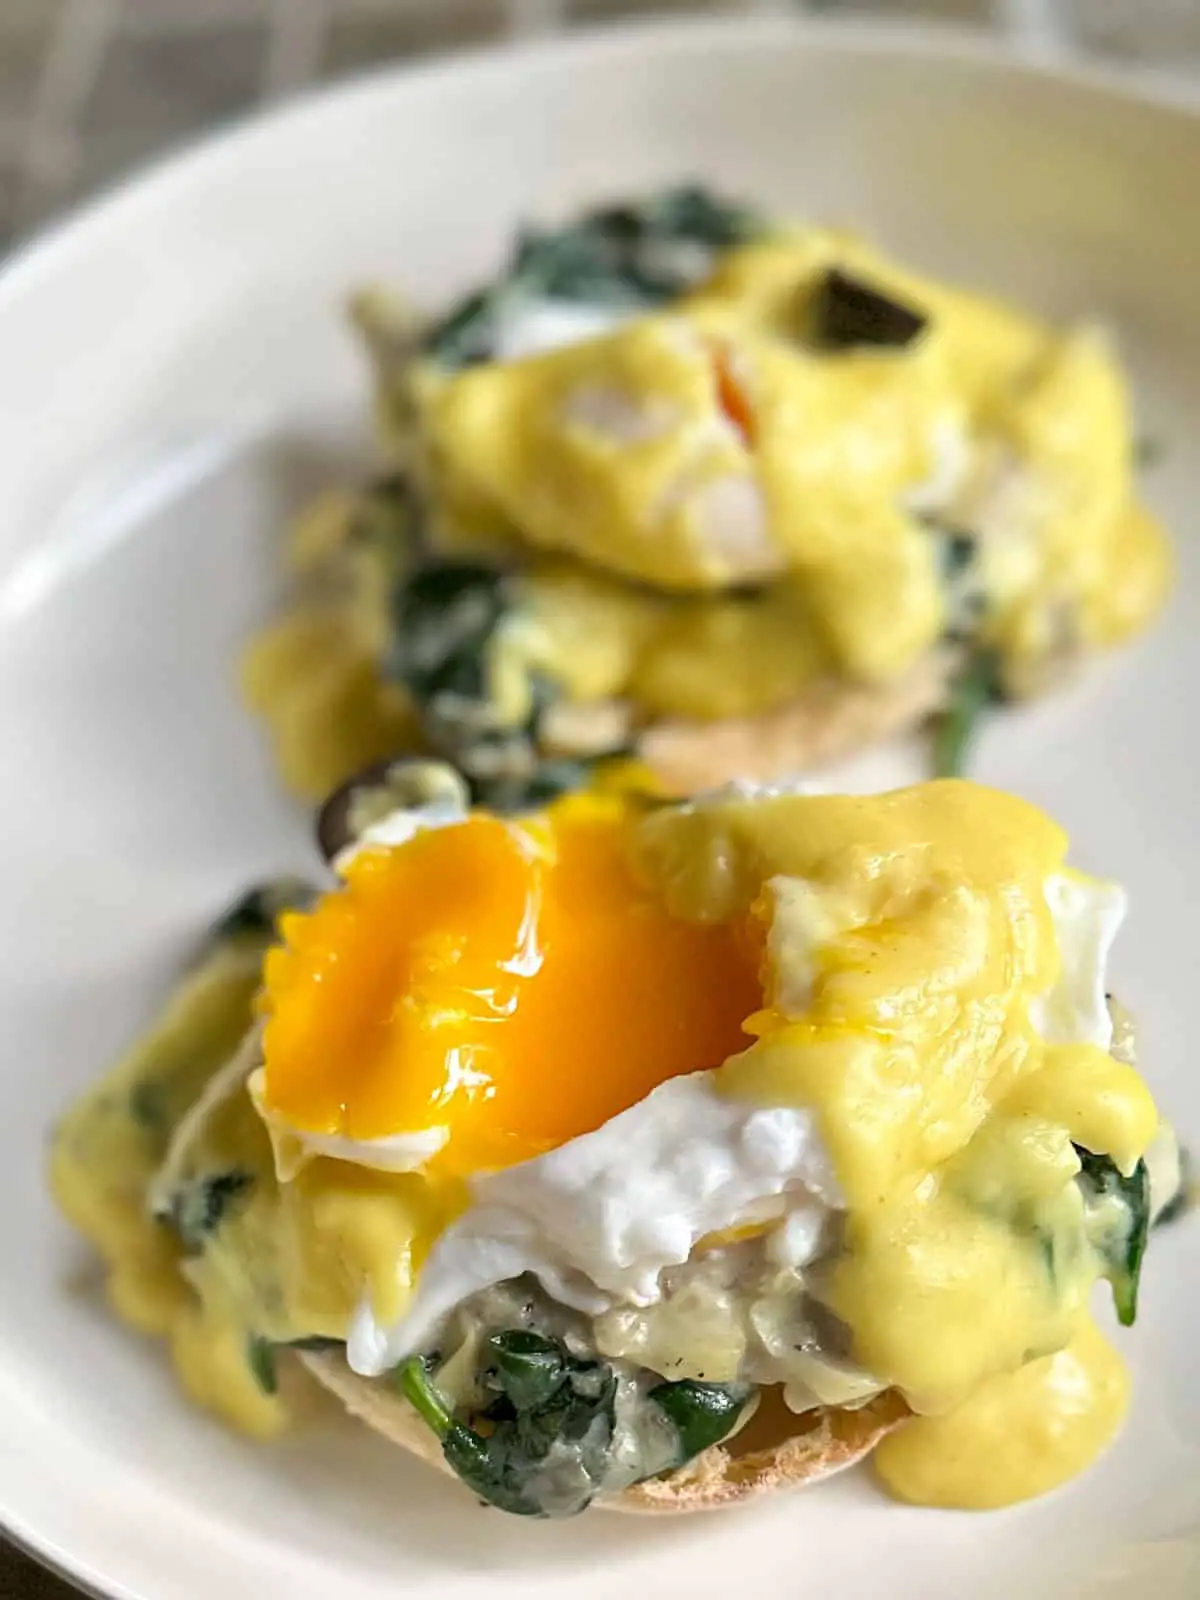 Poached eggs with hollandaise sauce and a black olive atop creamed spinach and artichokes and an English muffin on a white dish with one of the poached eggs showing the egg yolk.